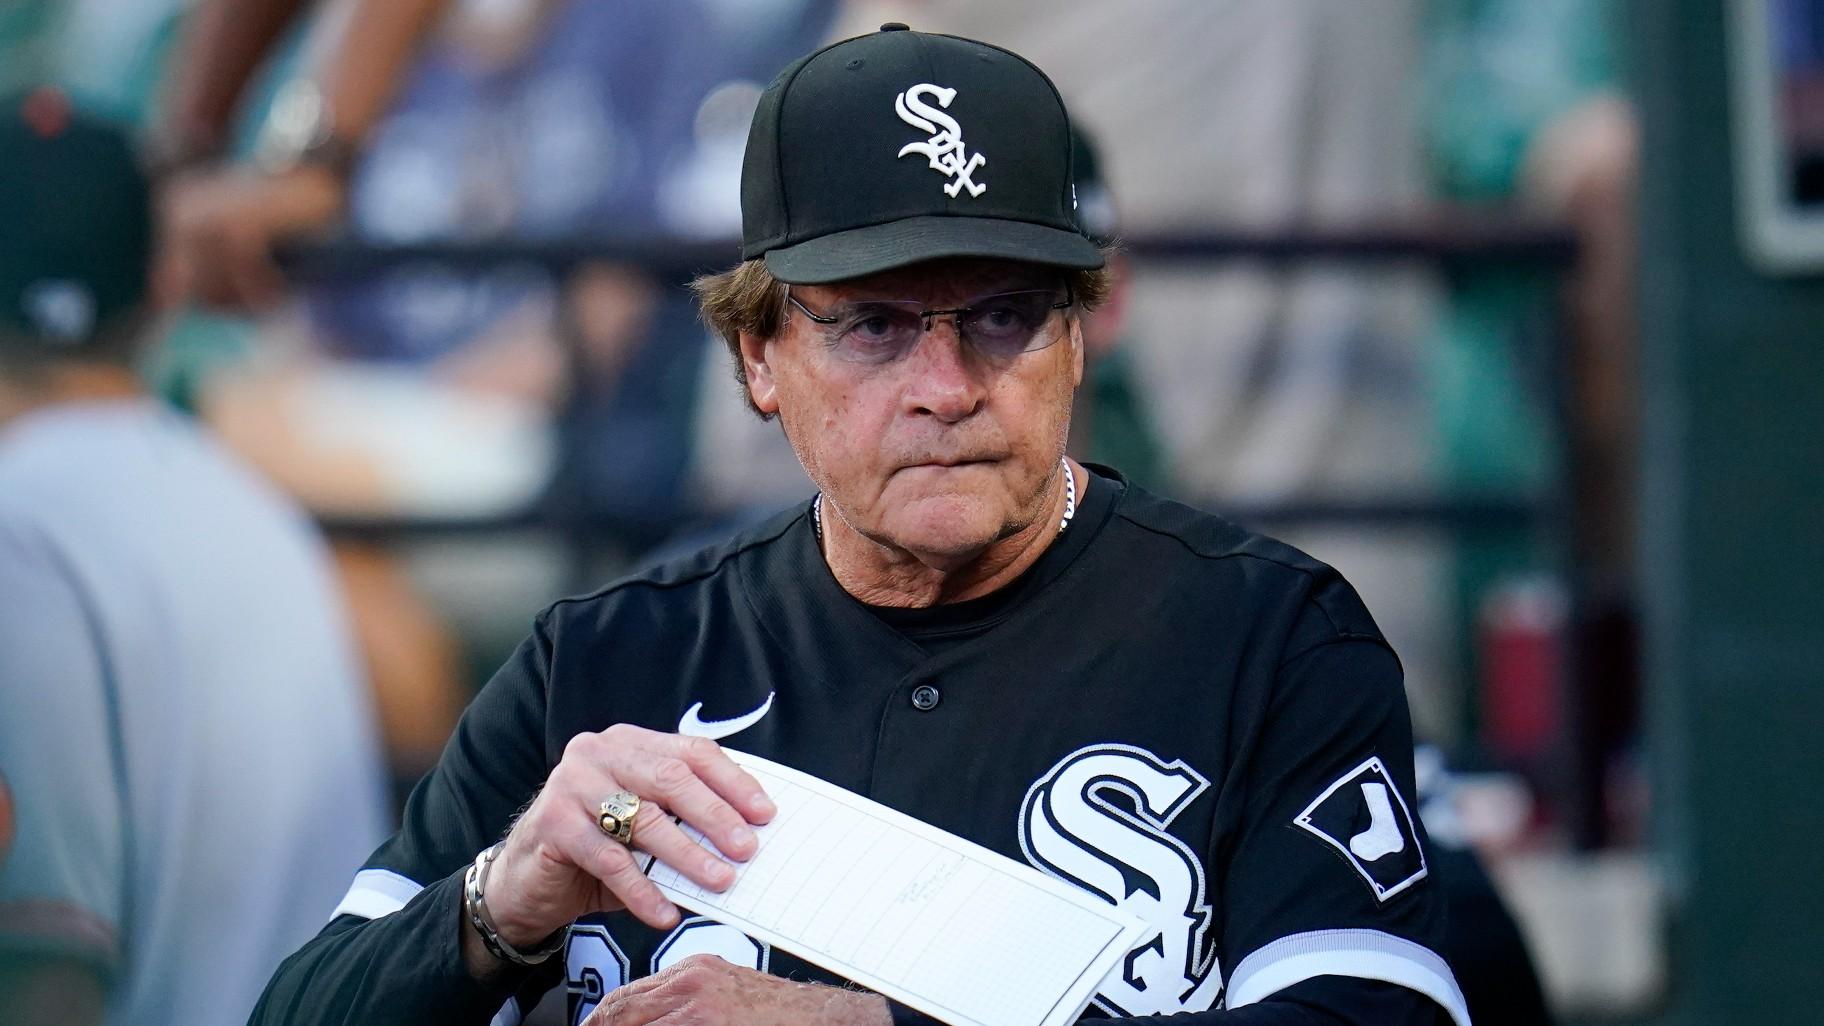 Chicago White Sox manager Tony La Russa looks on from the dugout prior to a baseball game against the Baltimore Orioles, Wednesday, Aug. 24, 2022, in Baltimore. (AP Photo / Julio Cortez)